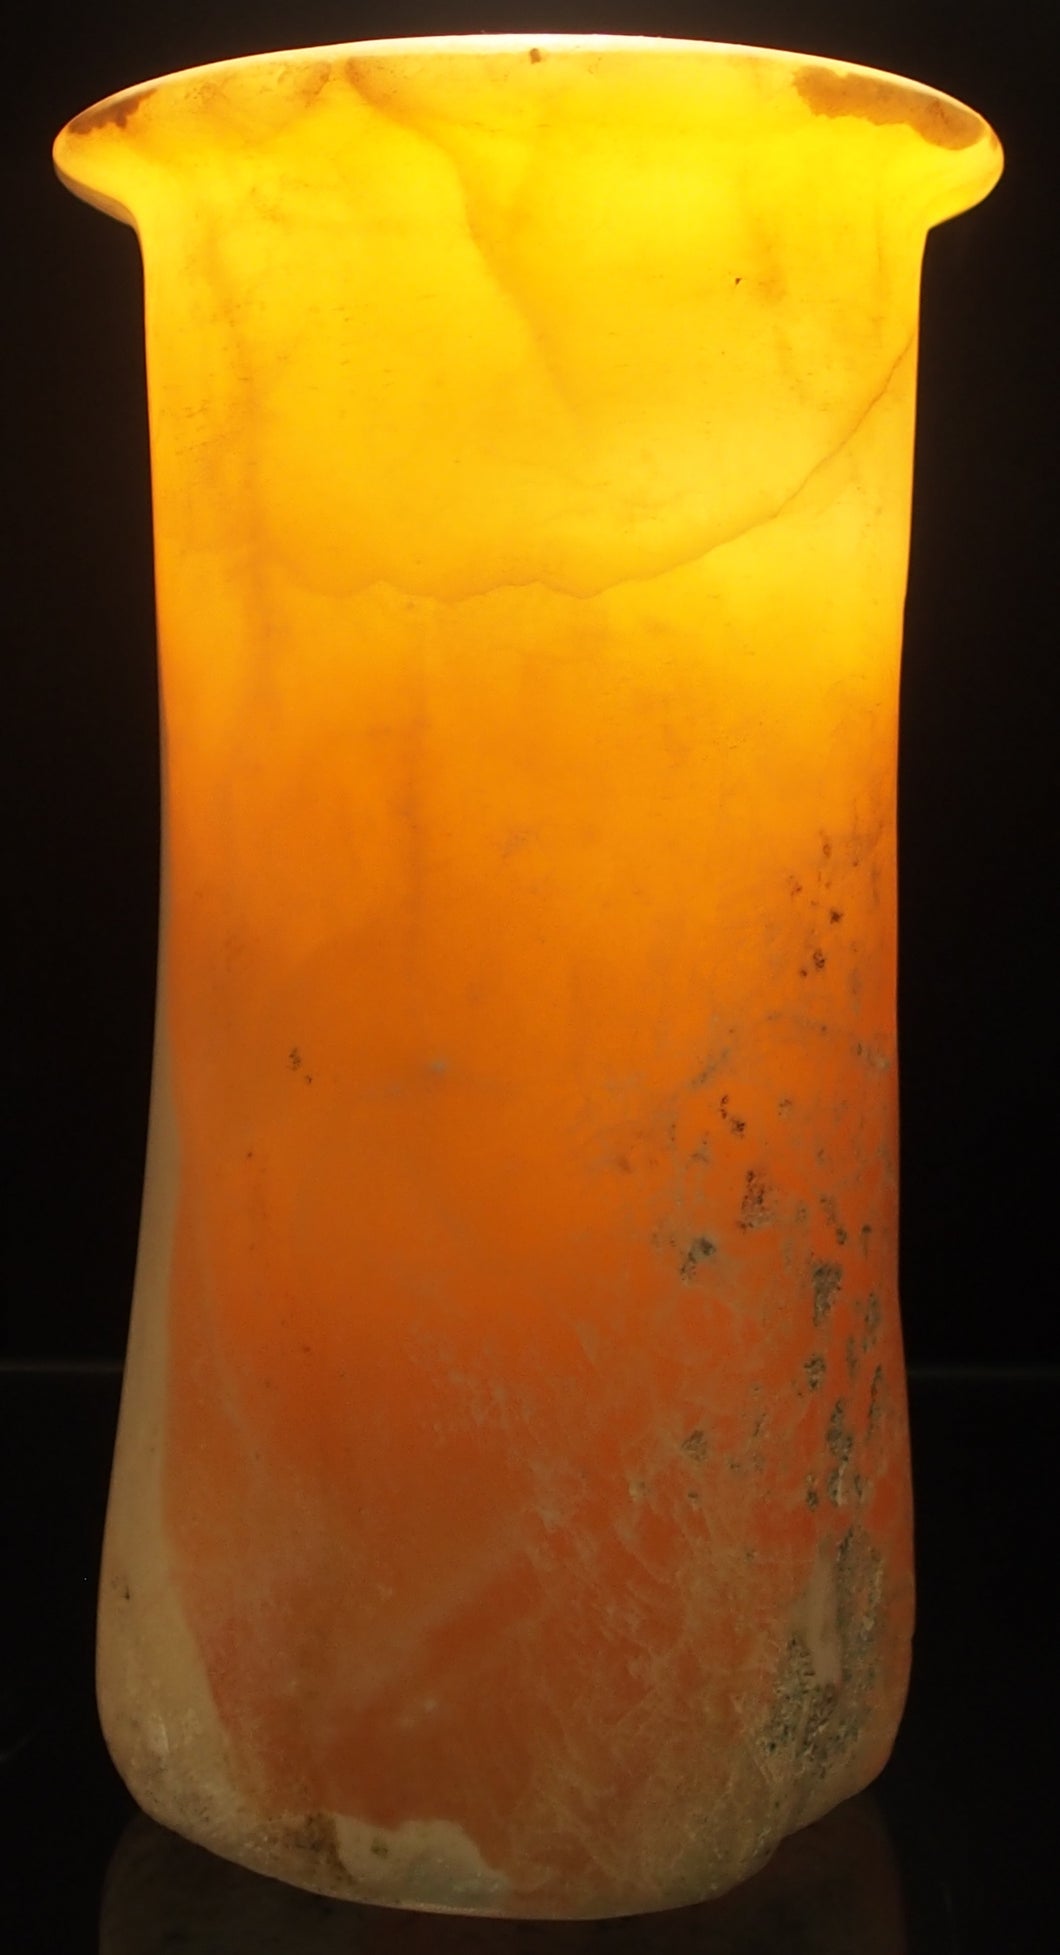 A Bactrian banded-calcite / alabaster tall vessel